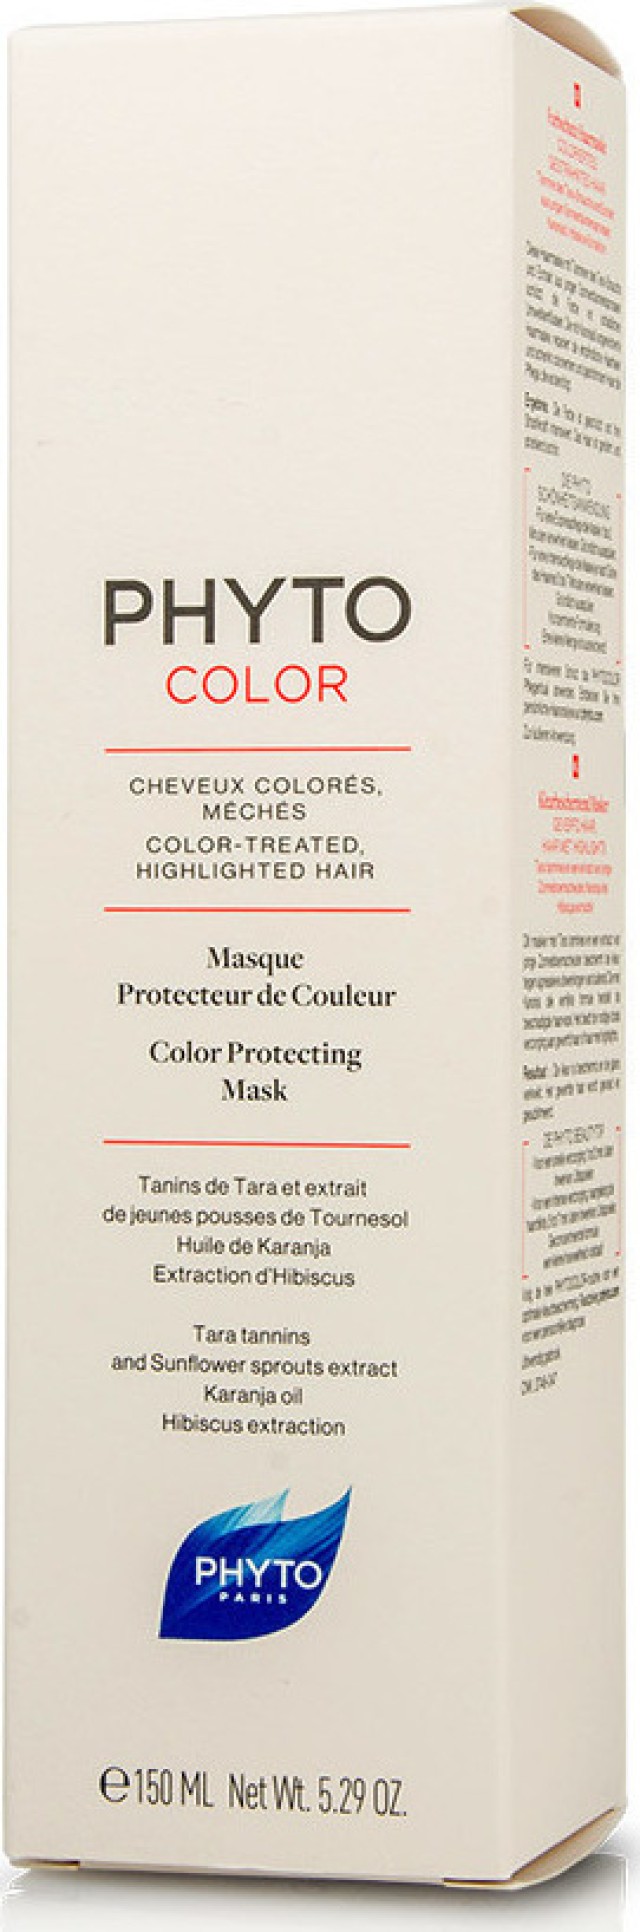 PHYTO Color Care Color Protecting Mask, Μάσκα Προστασίας Χρώματος Μαλλιών 150ml